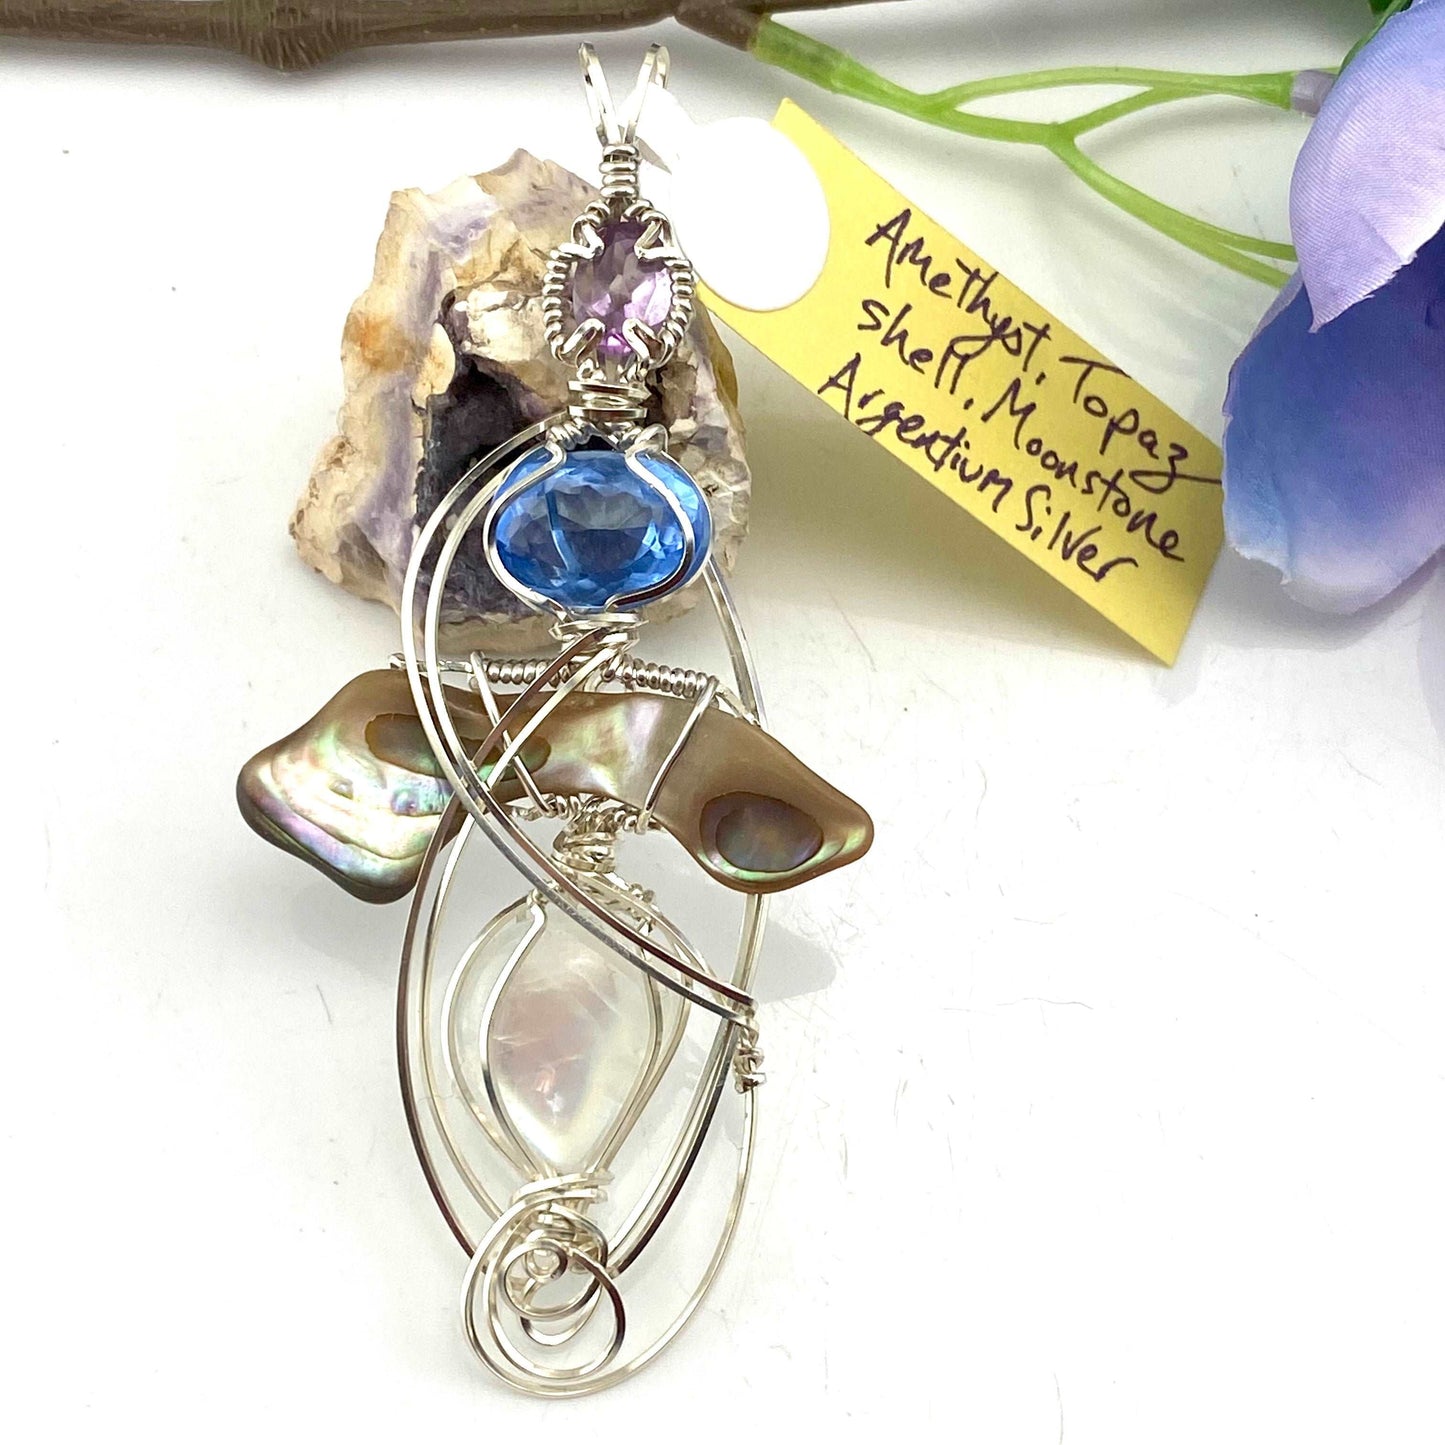 Amethyst, Topaz, Shell, and Moonstone in Argentium Silver - Pendant